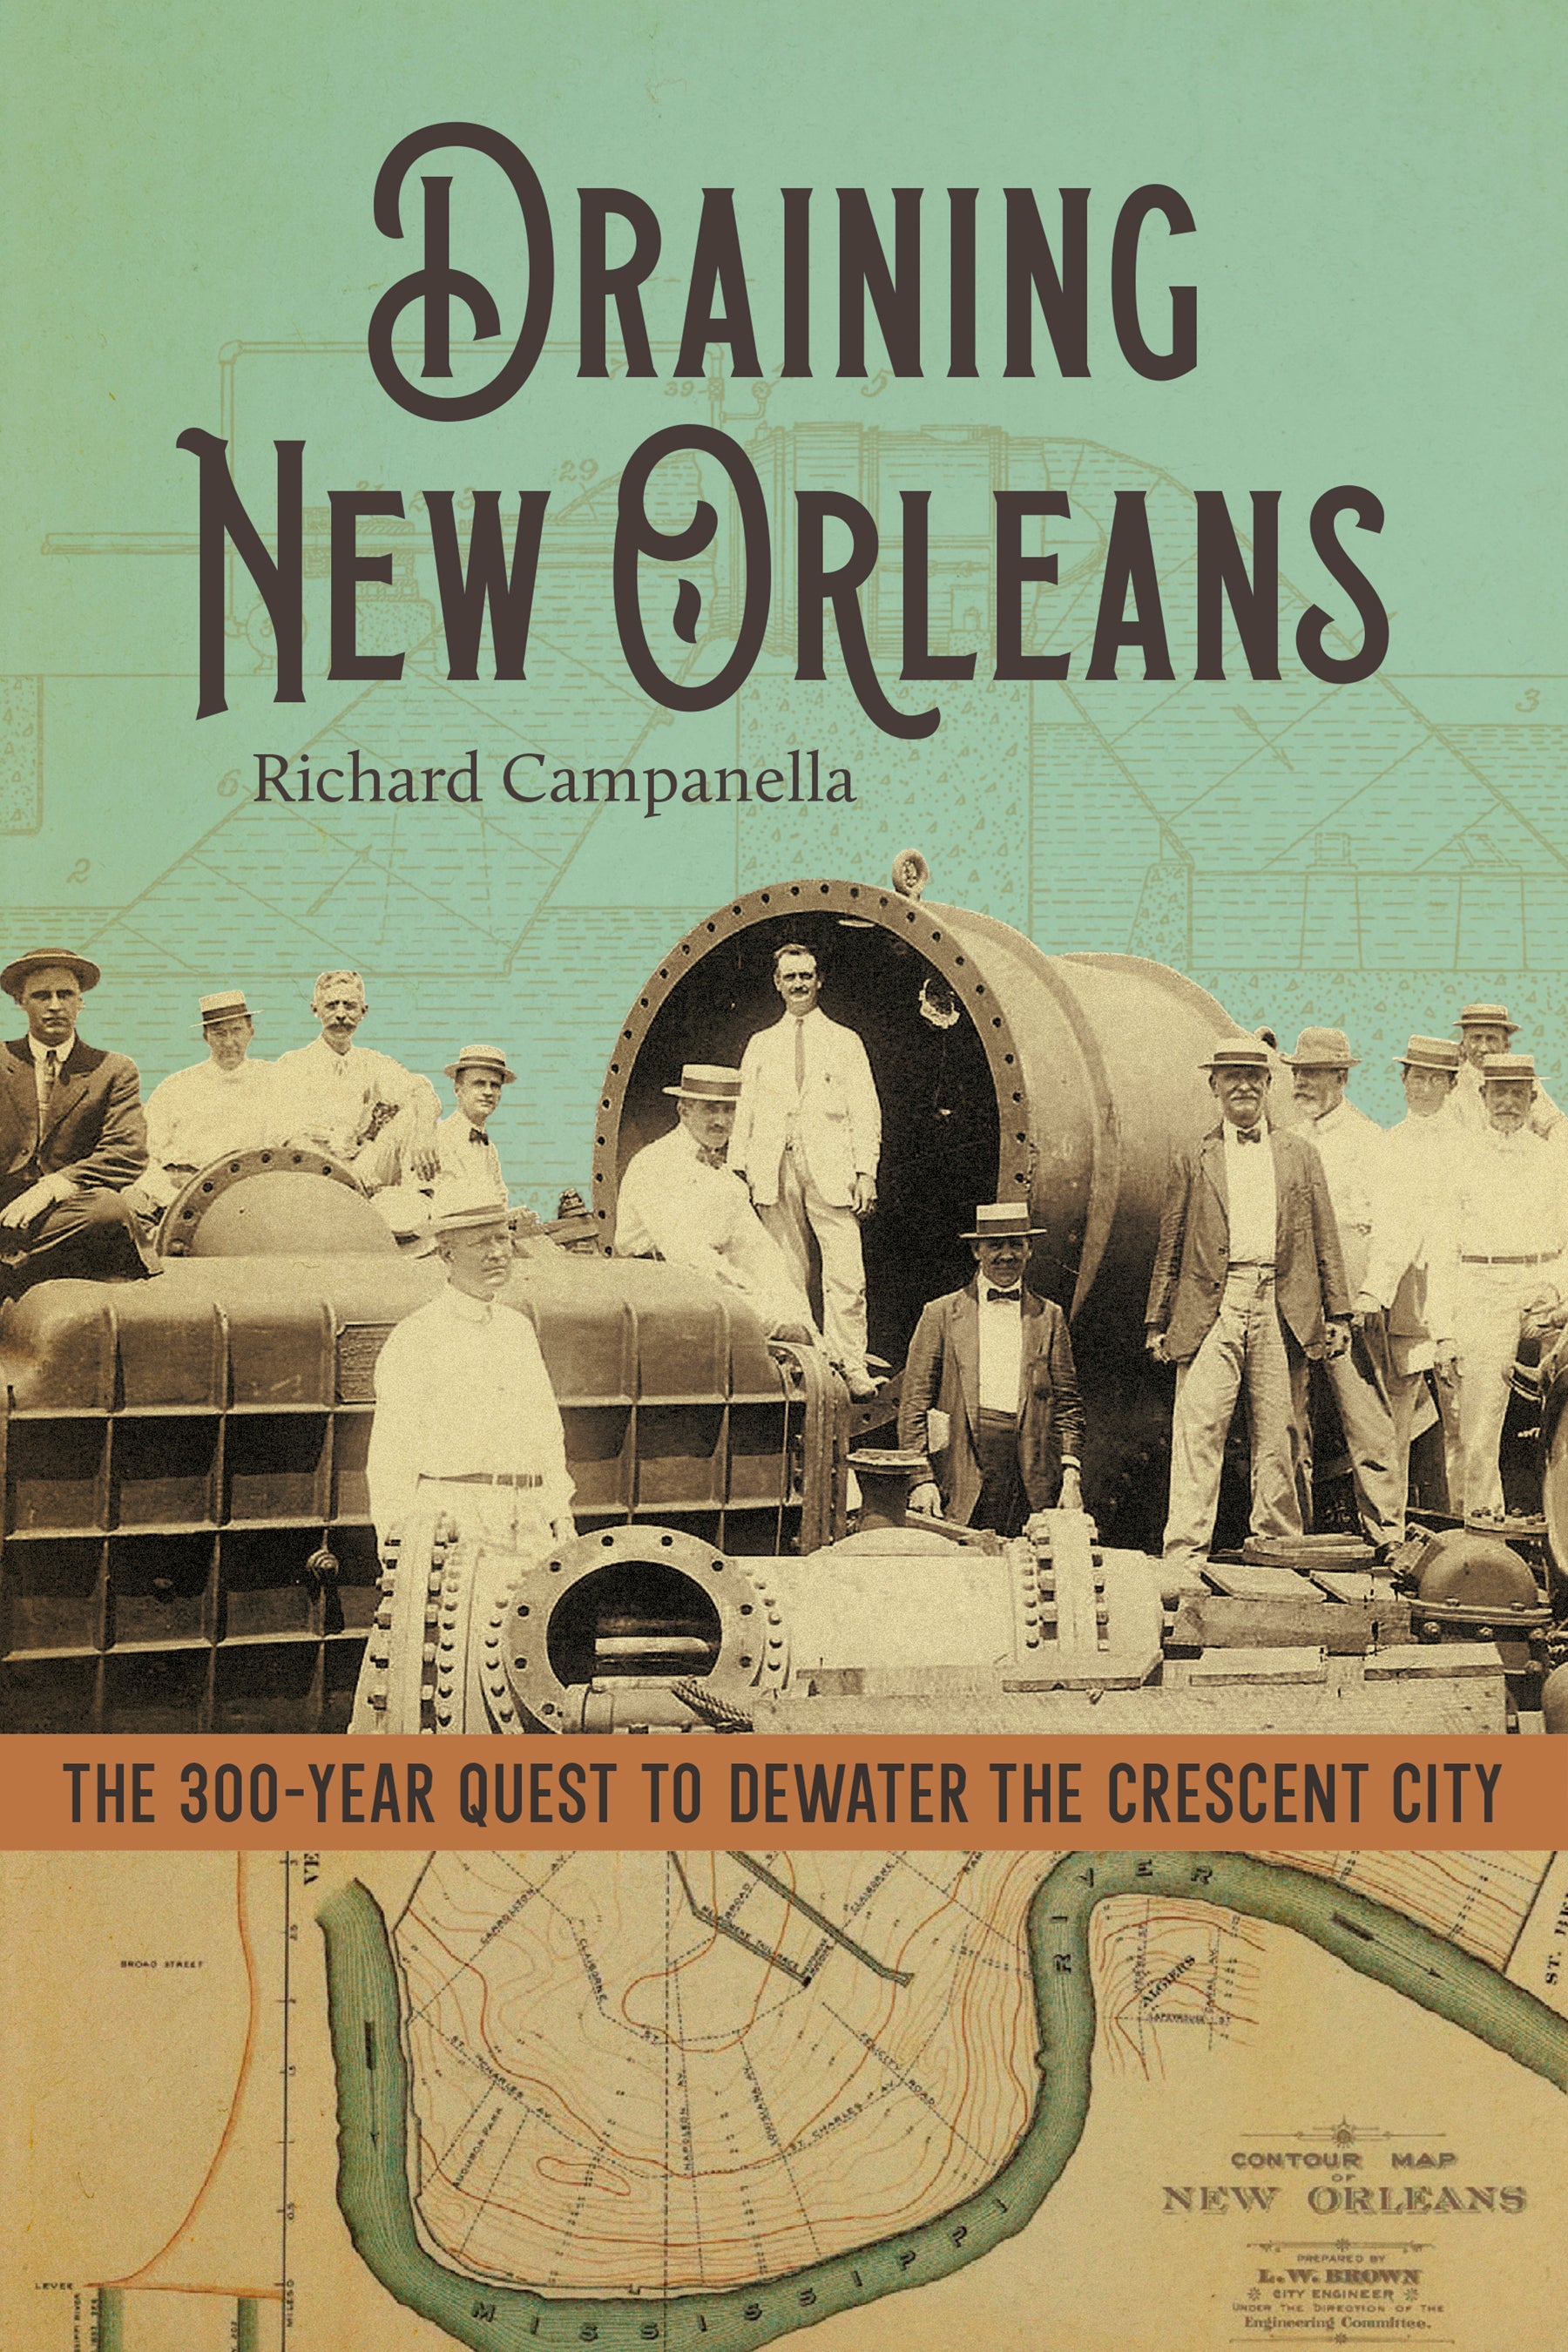 Draining New Orleans The 300-Year Quest to Dewater the Crescent City Hardcover book